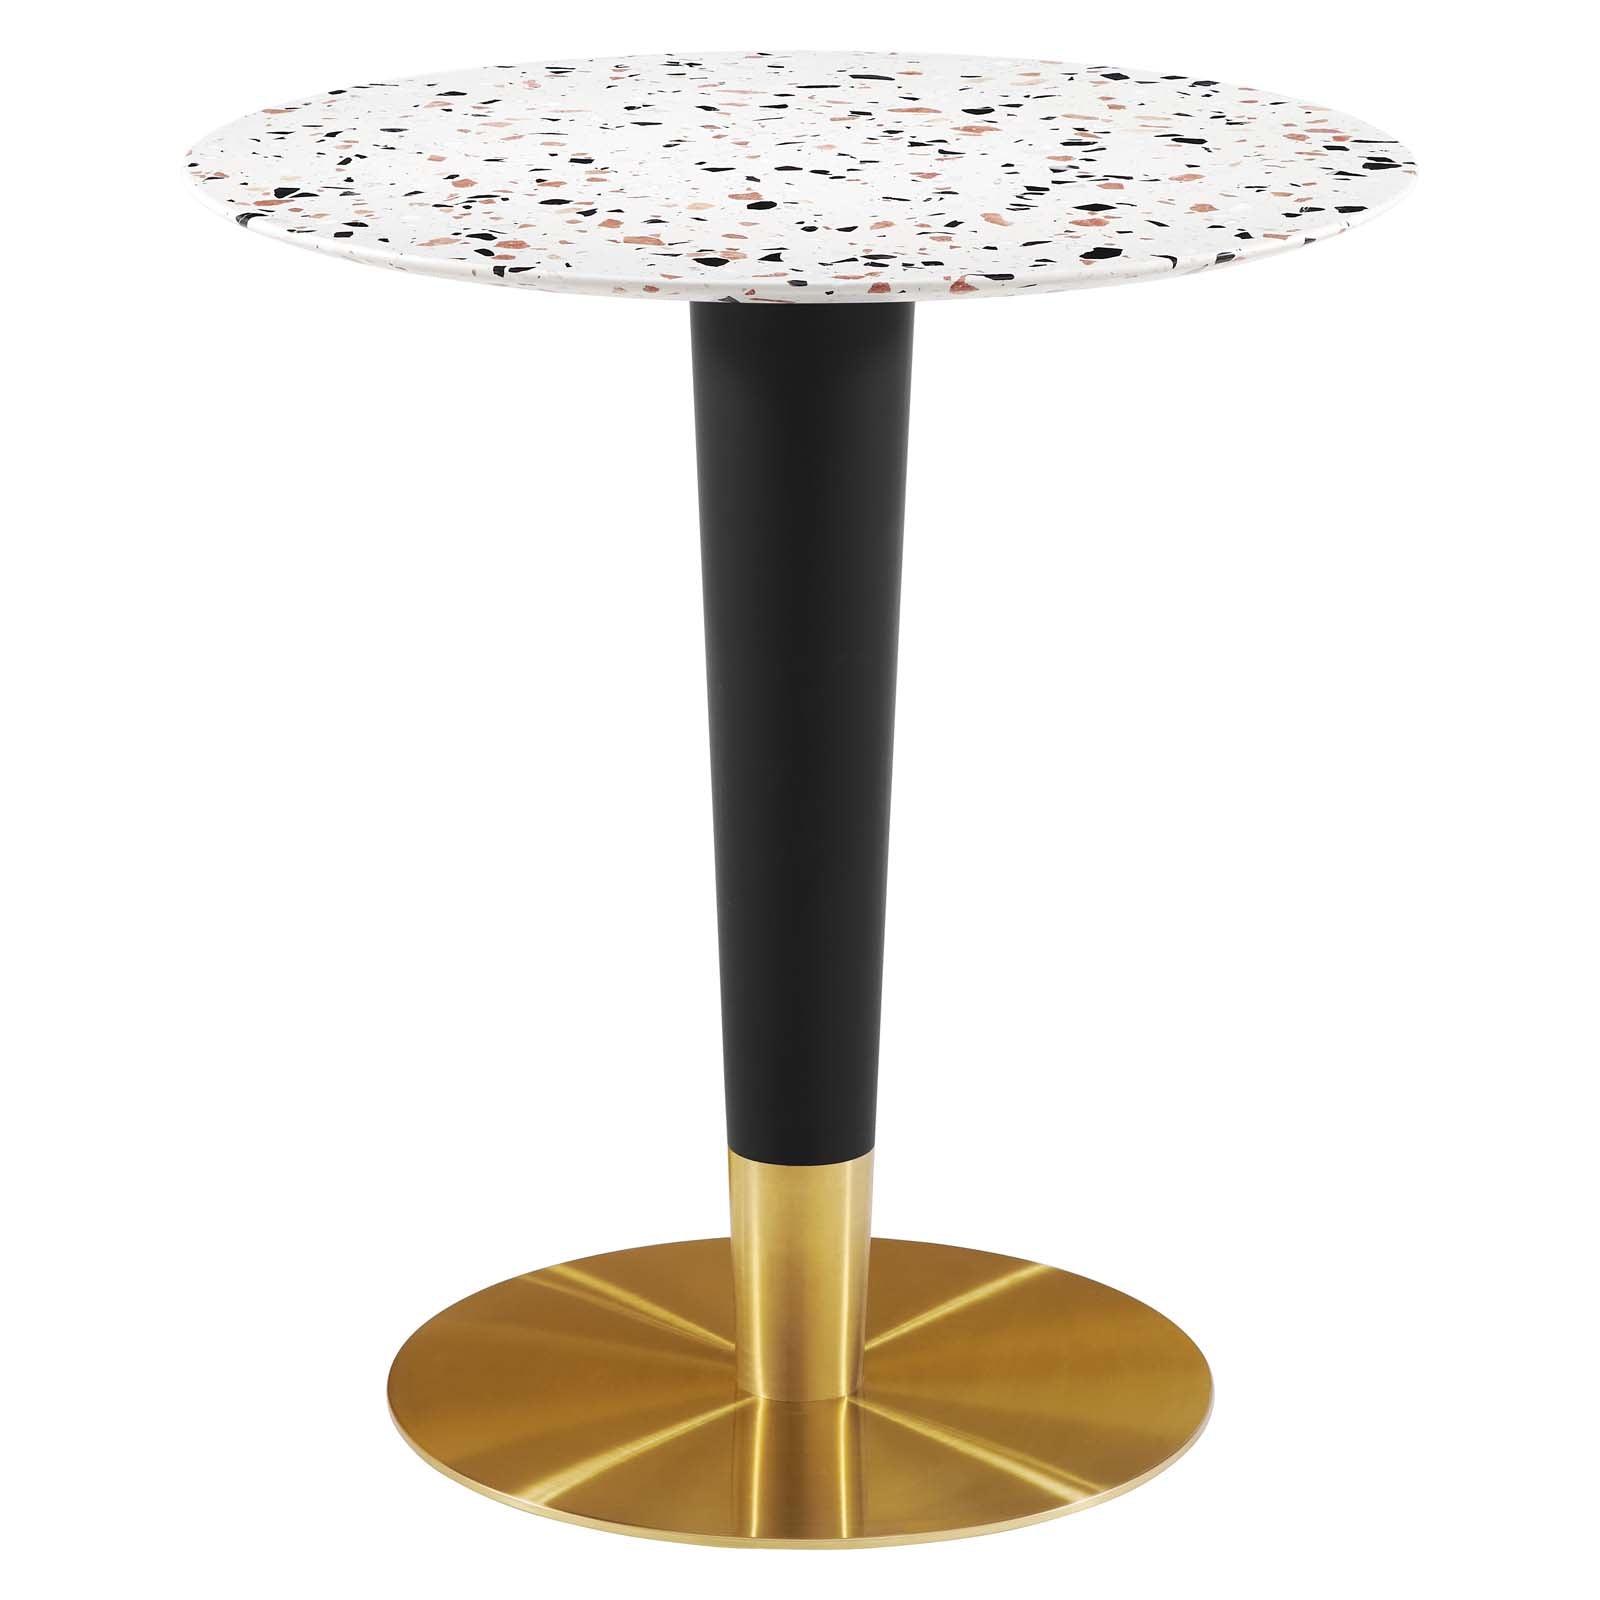 Zinque 28" Round Terrazzo Dining Table-Dining Table-Modway-Wall2Wall Furnishings